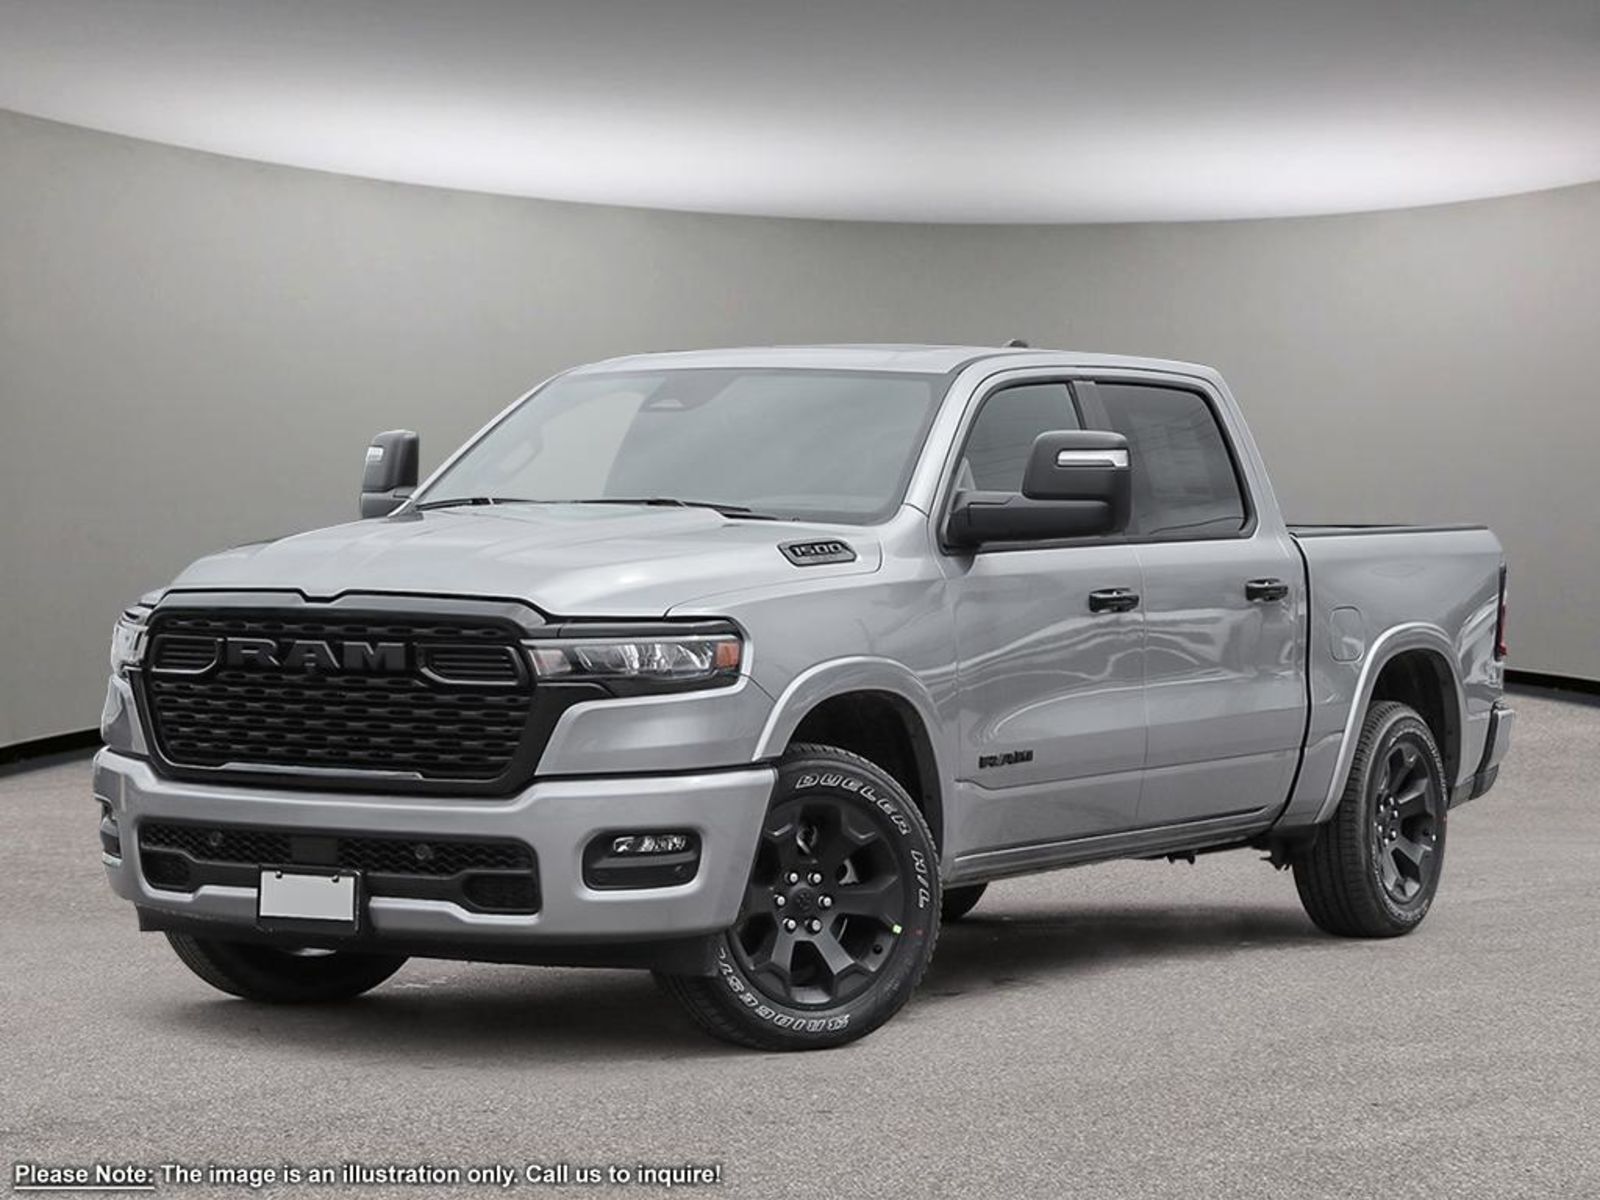 2025 Ram 1500 BIG HORN NIGHT EDITION IN BILLET SILVER EQUIPPED W